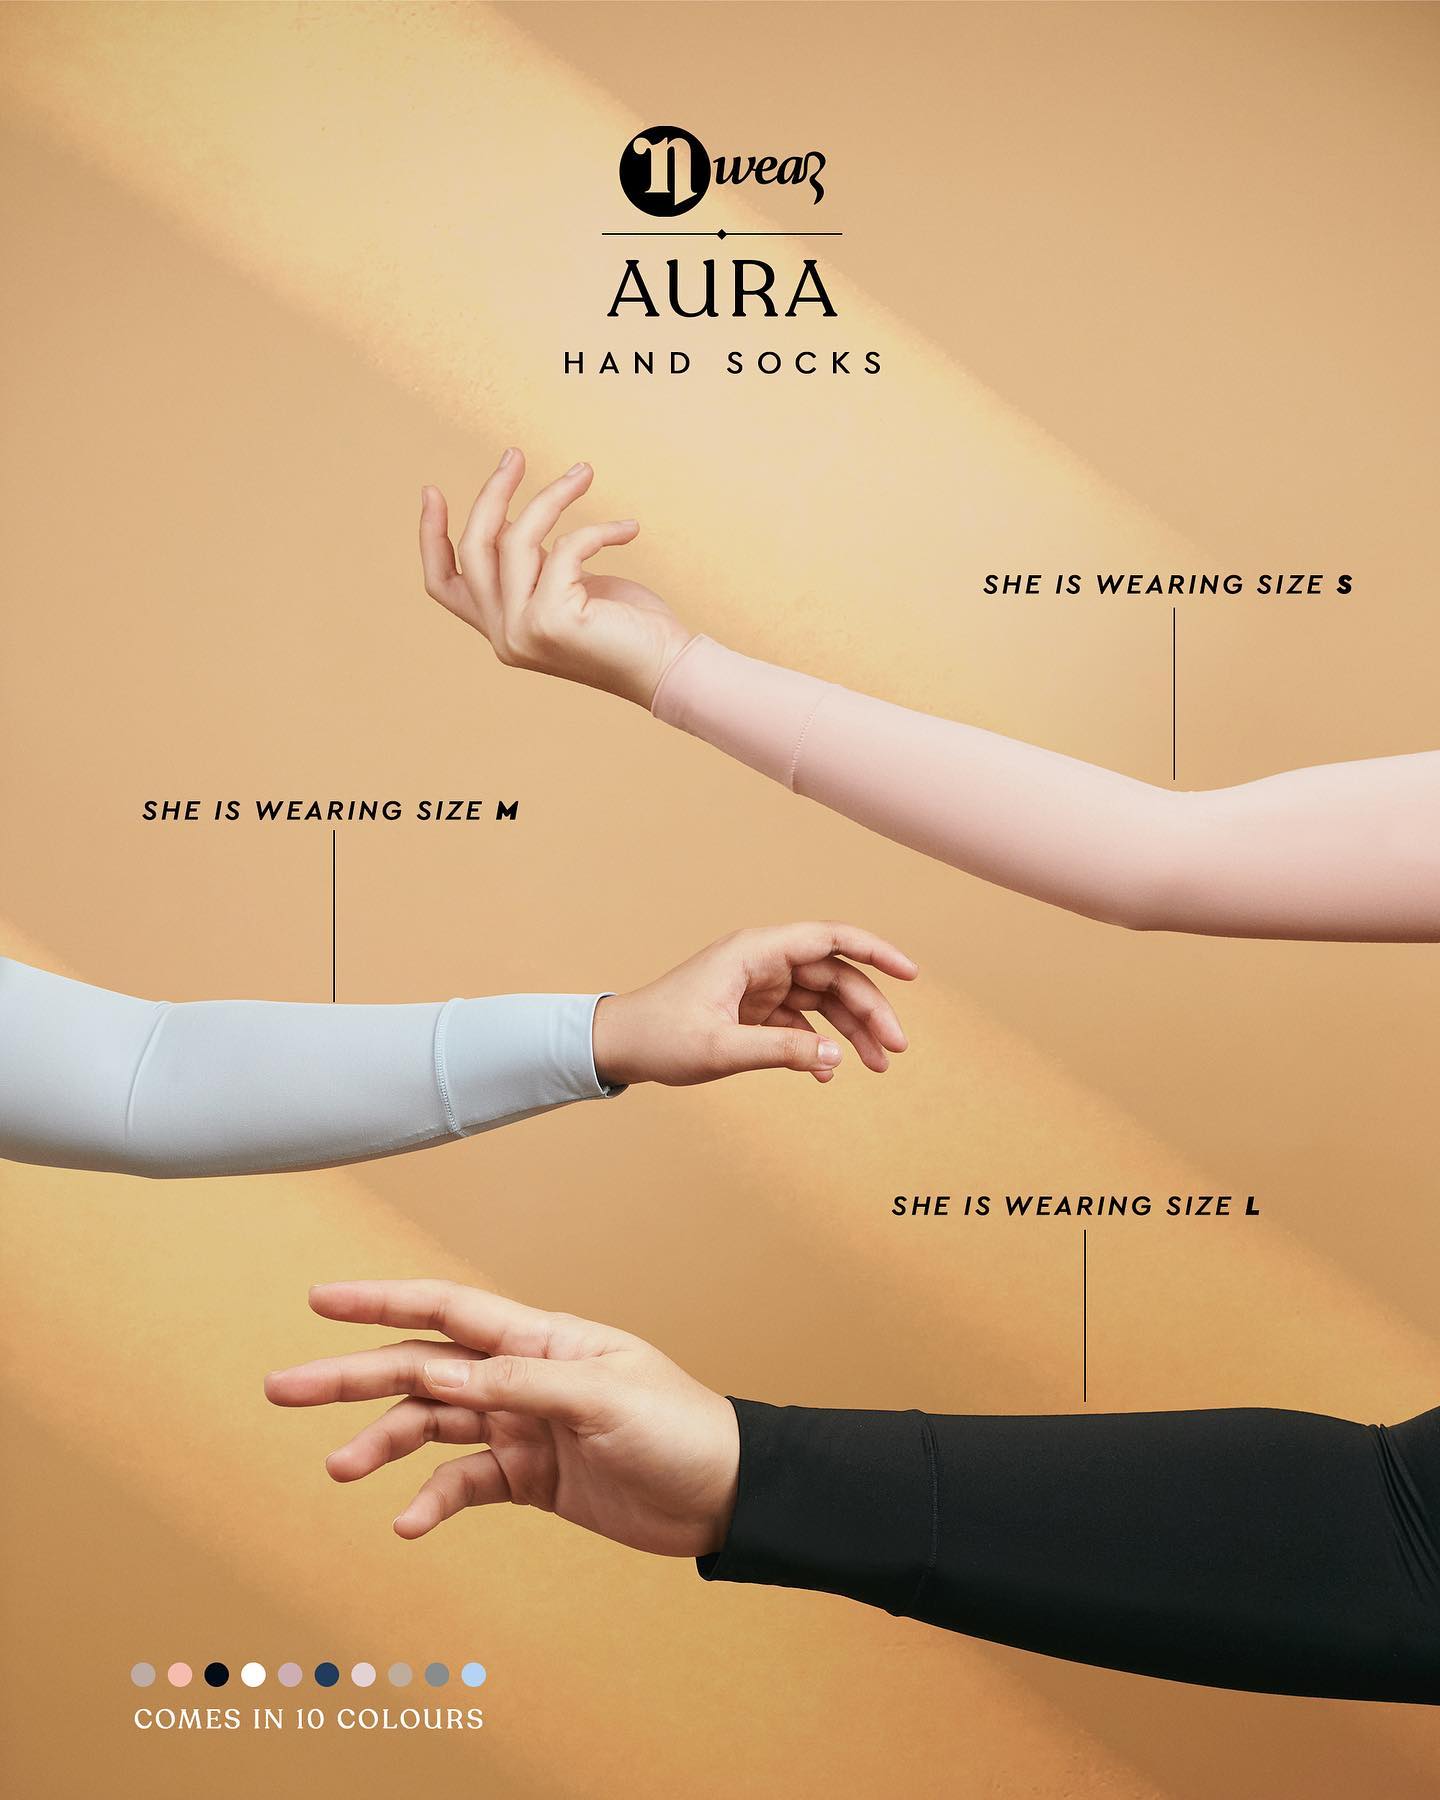 Our first ever nWear Aura Hand socks comes in 3 different sizes—S, M and L.<br/>
Our aim is to make sure that everyone can fit into it perfectly without any tugging or rolling. Who's excited for this 🙋🏻‍♀🙋🏻‍♀🙋🏻‍♀<br/>
#Naelofar